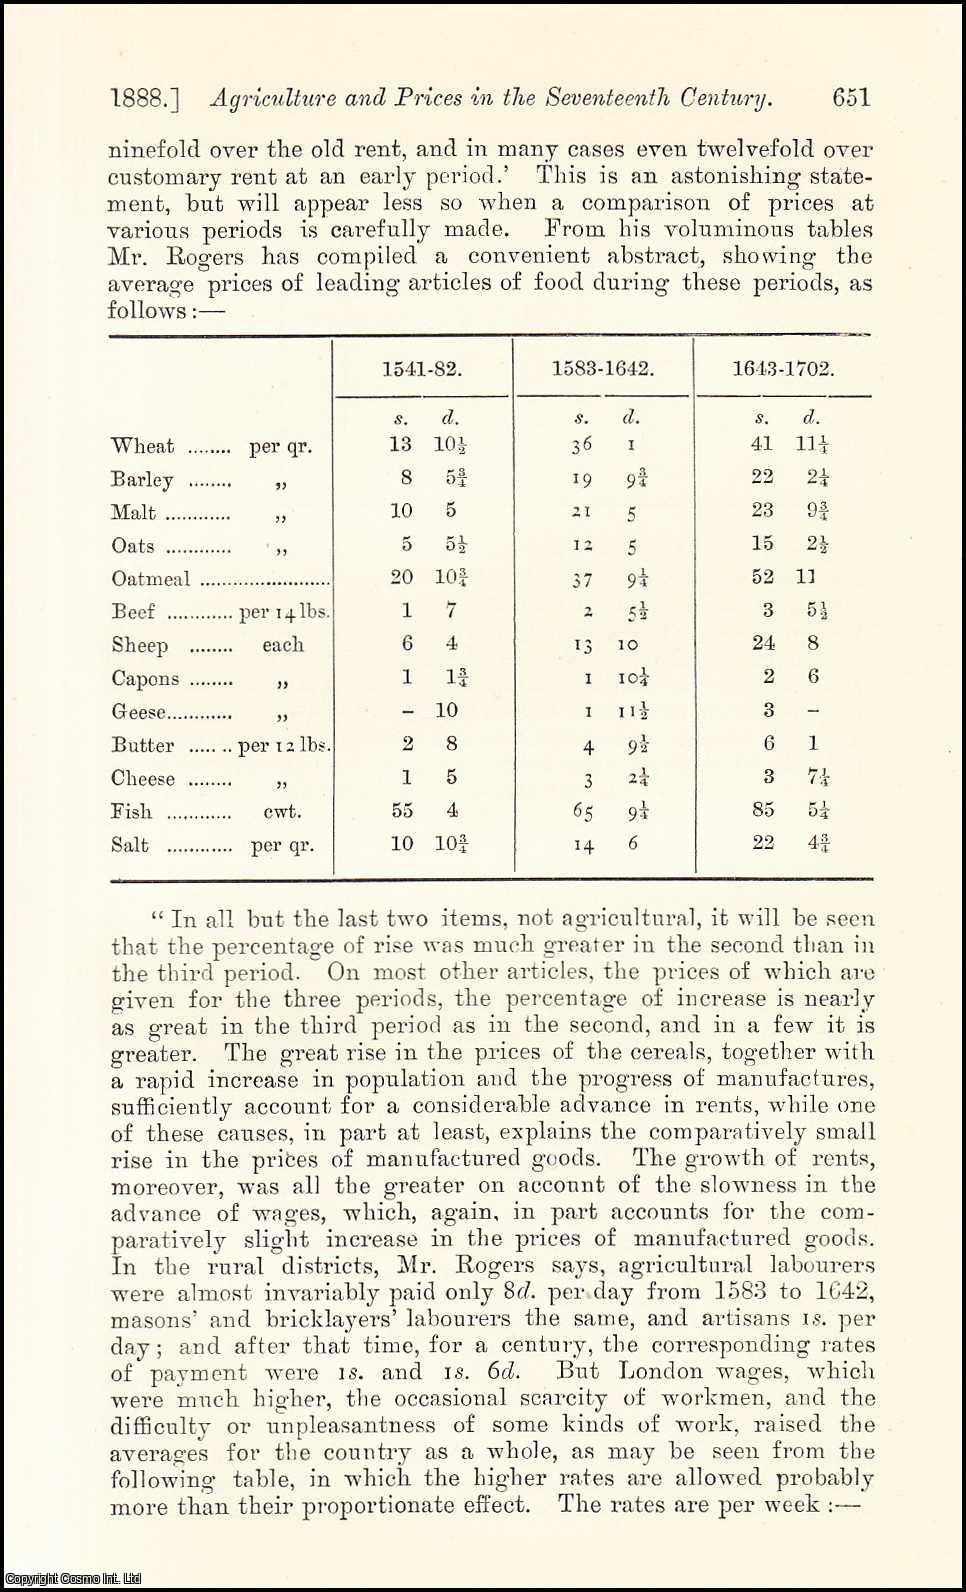 No Author Stated - Agriculture & Prices in the Seventeenth Century. An uncommon original article from the Journal of the Royal Statistical Society of London, 1888.